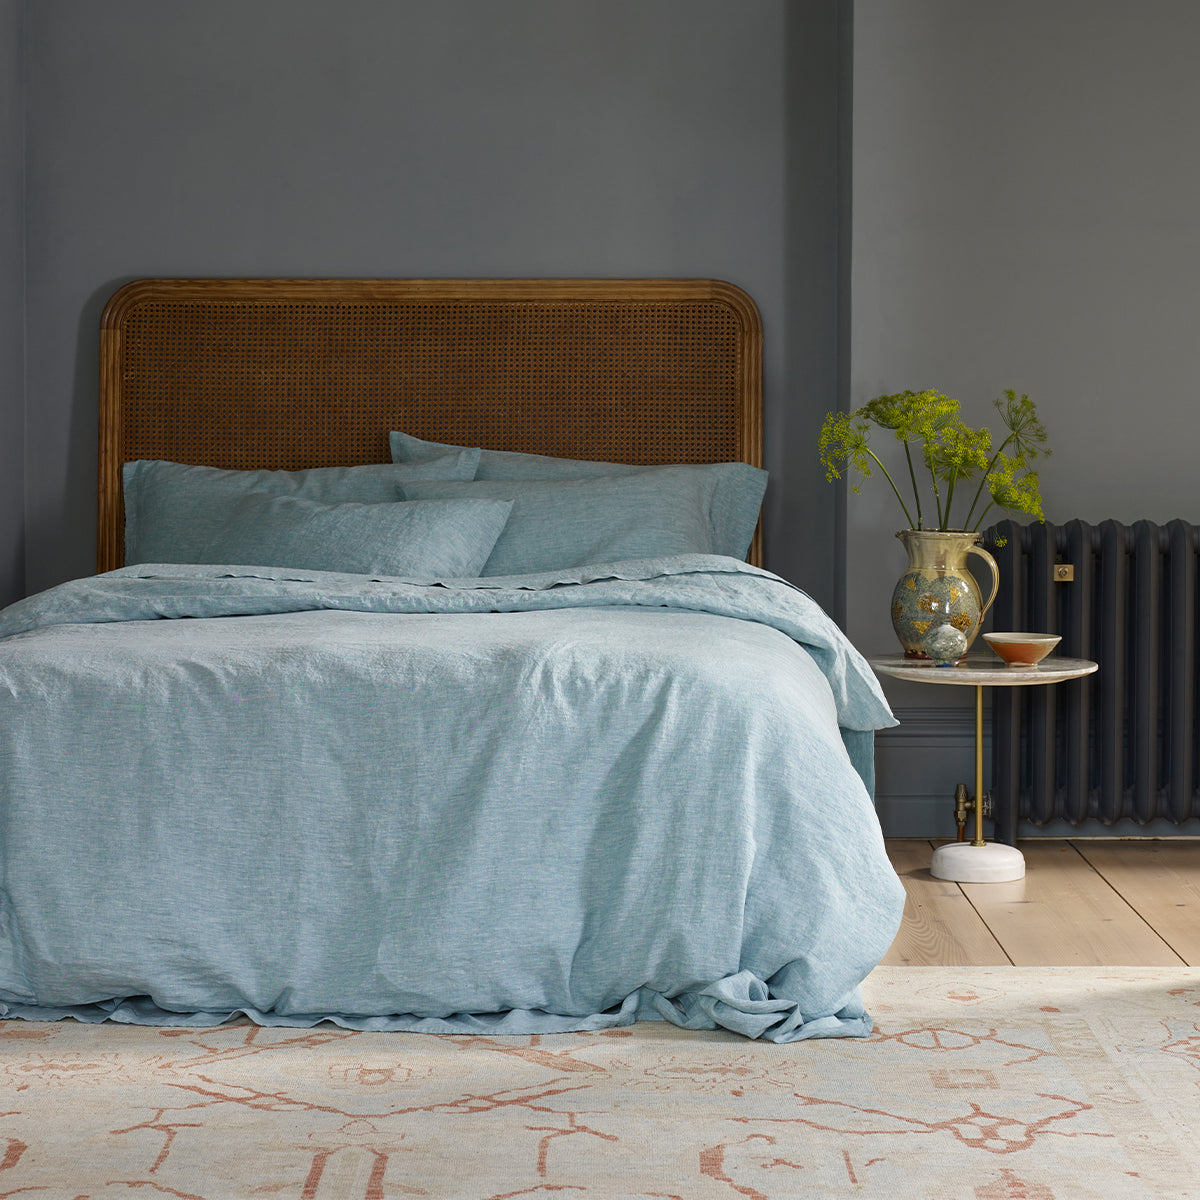 Wallace Cotton - Our Eucalyptus Duvet Set features a leafy print which  falls delicately down the bed in a gentle palette of greens, blues and  greys on crisp white organic cotton.